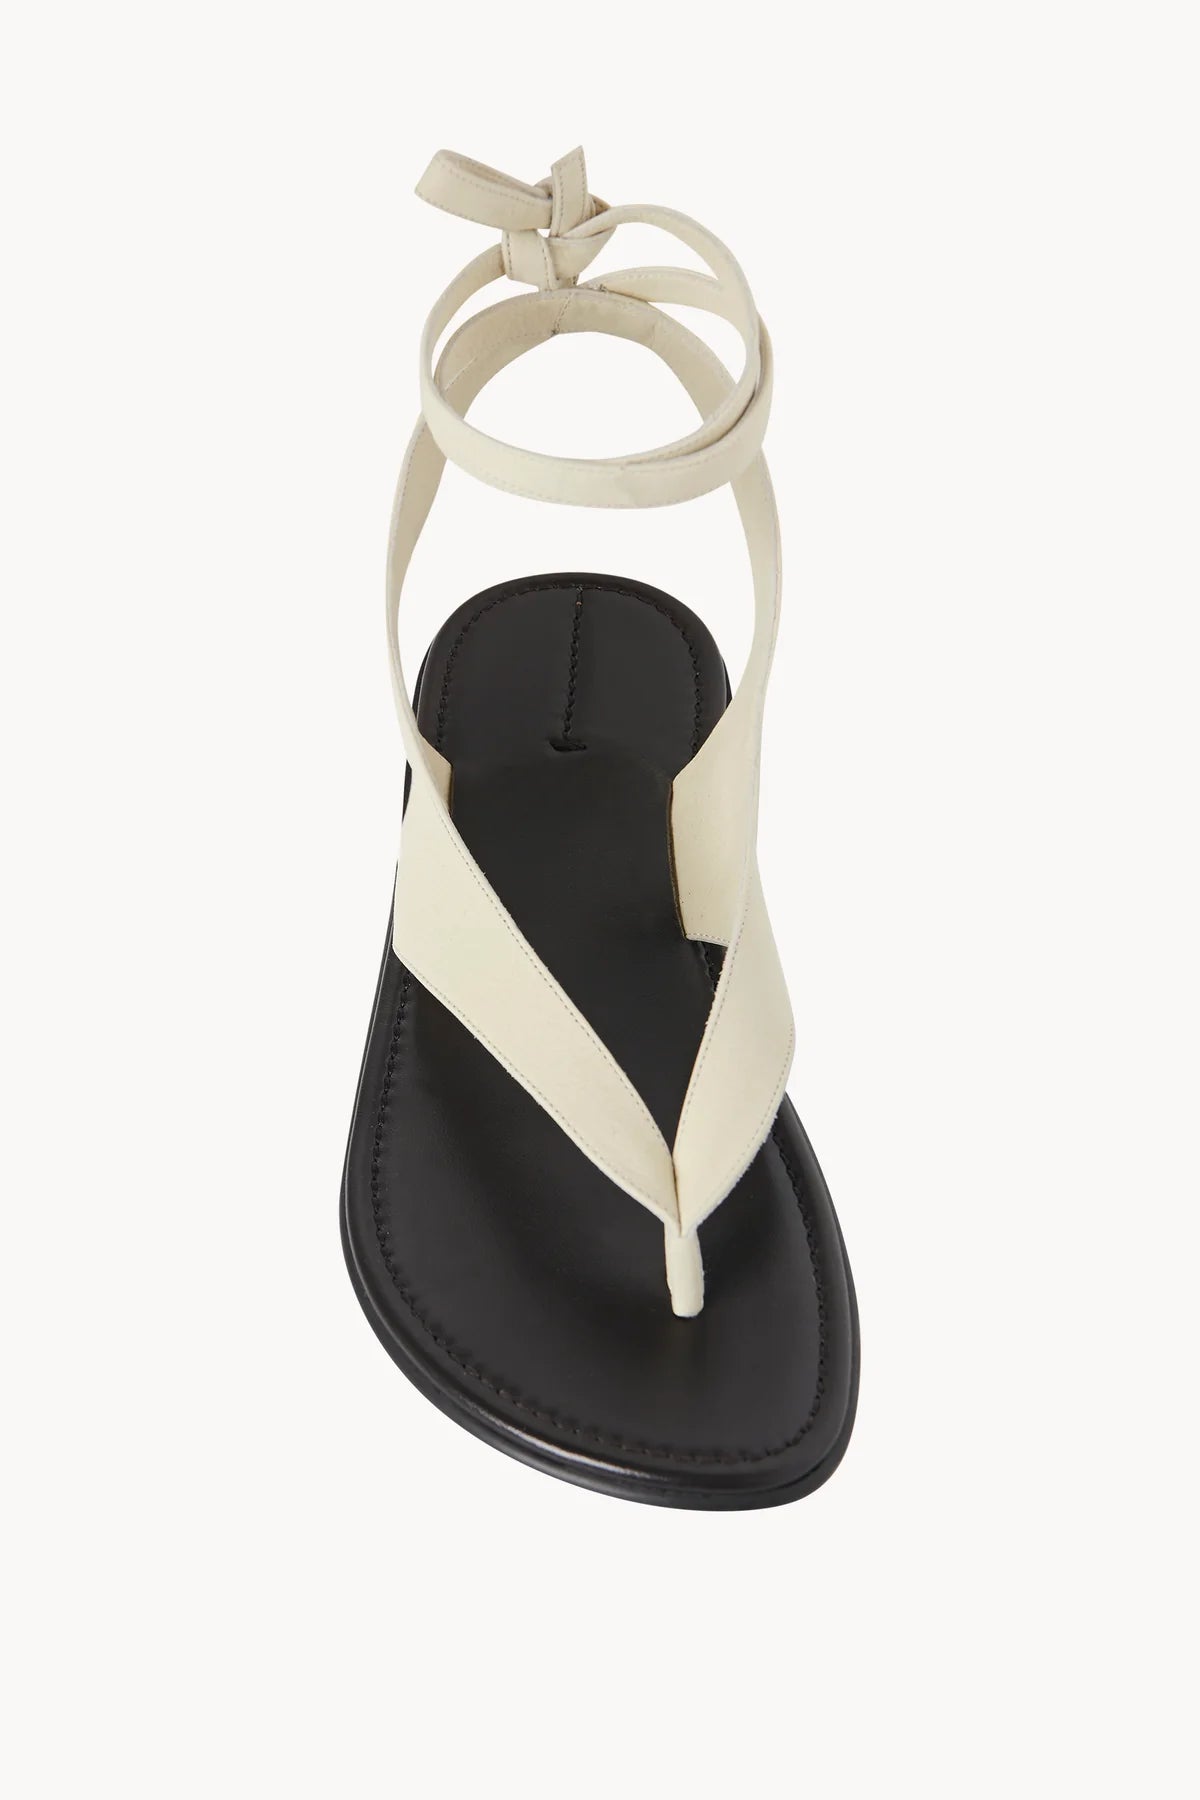 the-row-beach-sandal-leather-ghost-amarees